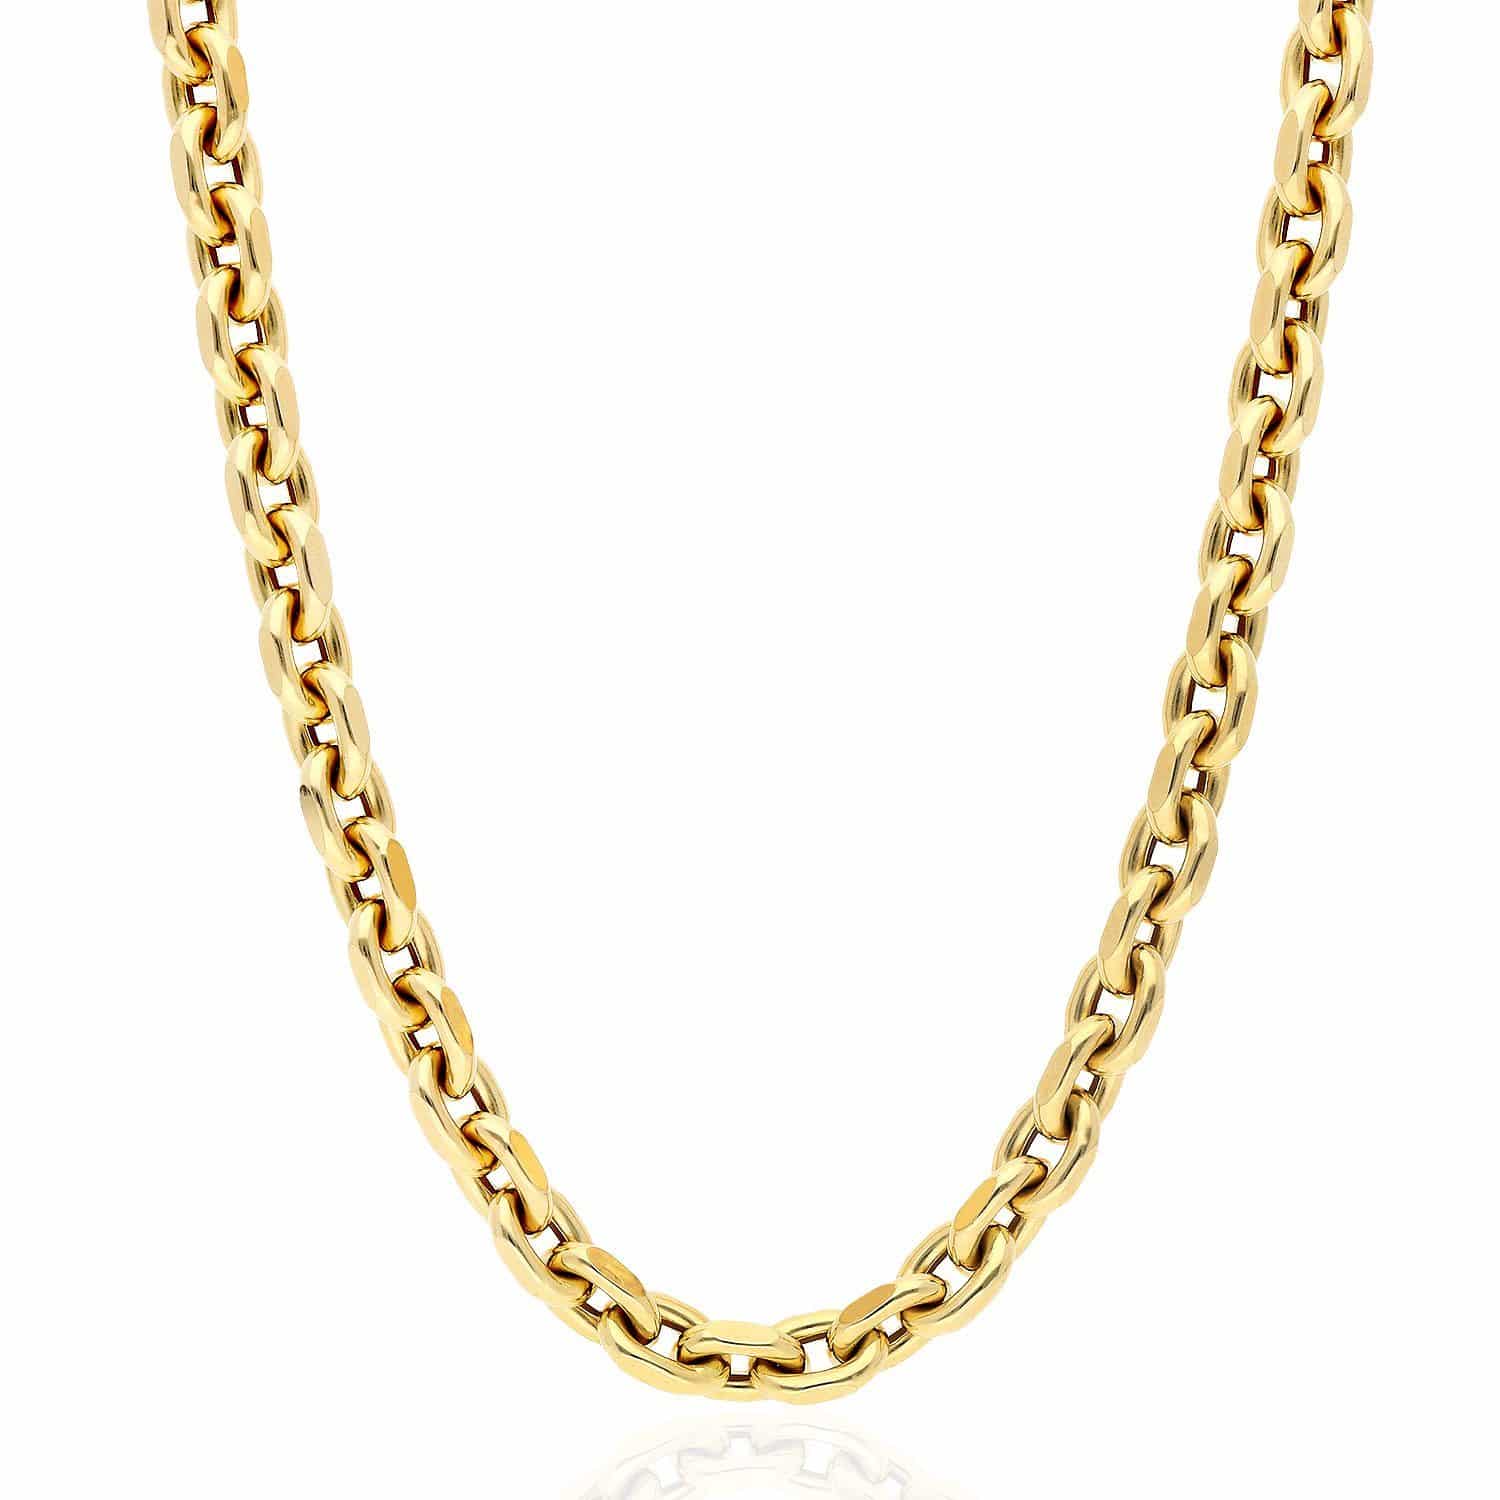 14k Yellow Gold 7 5mm Diamond Cut Cable Chain Necklace 22″ 24″ 26″ Wjd Exclusives